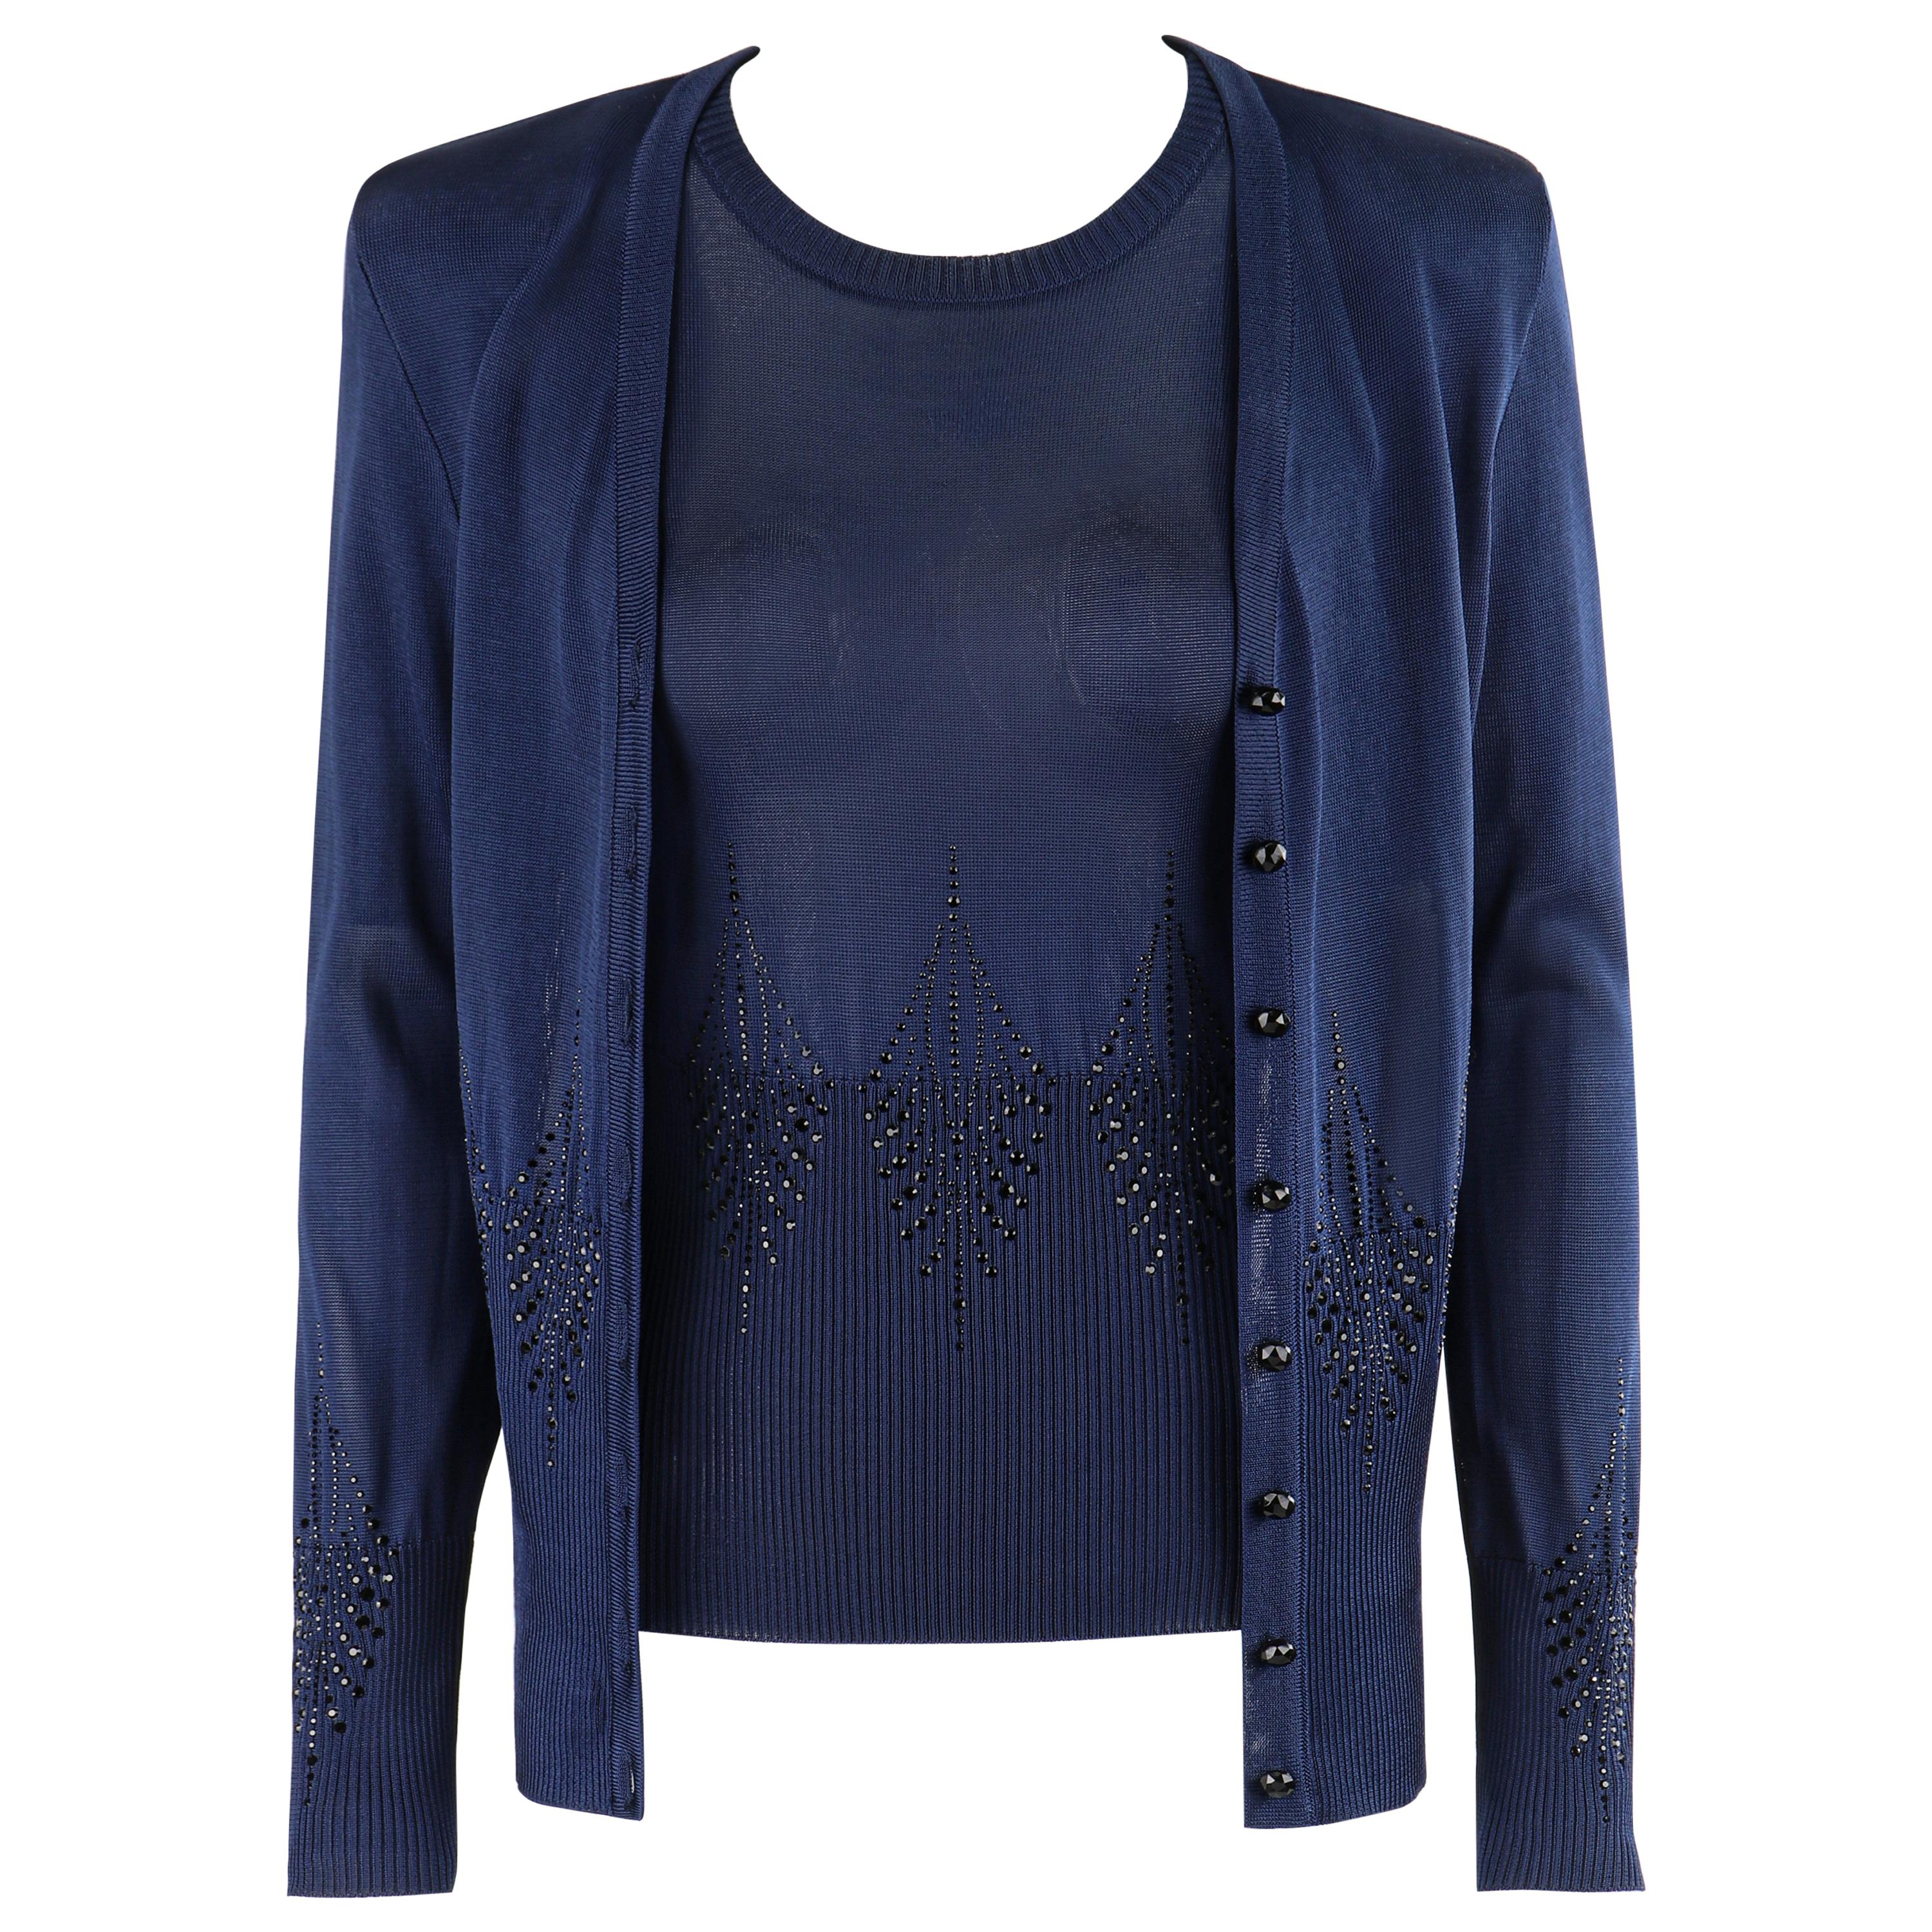 GIVENCHY Couture A/W 1998 ALEXANDER McQUEEN Embellished Knit Top Cardigan Set